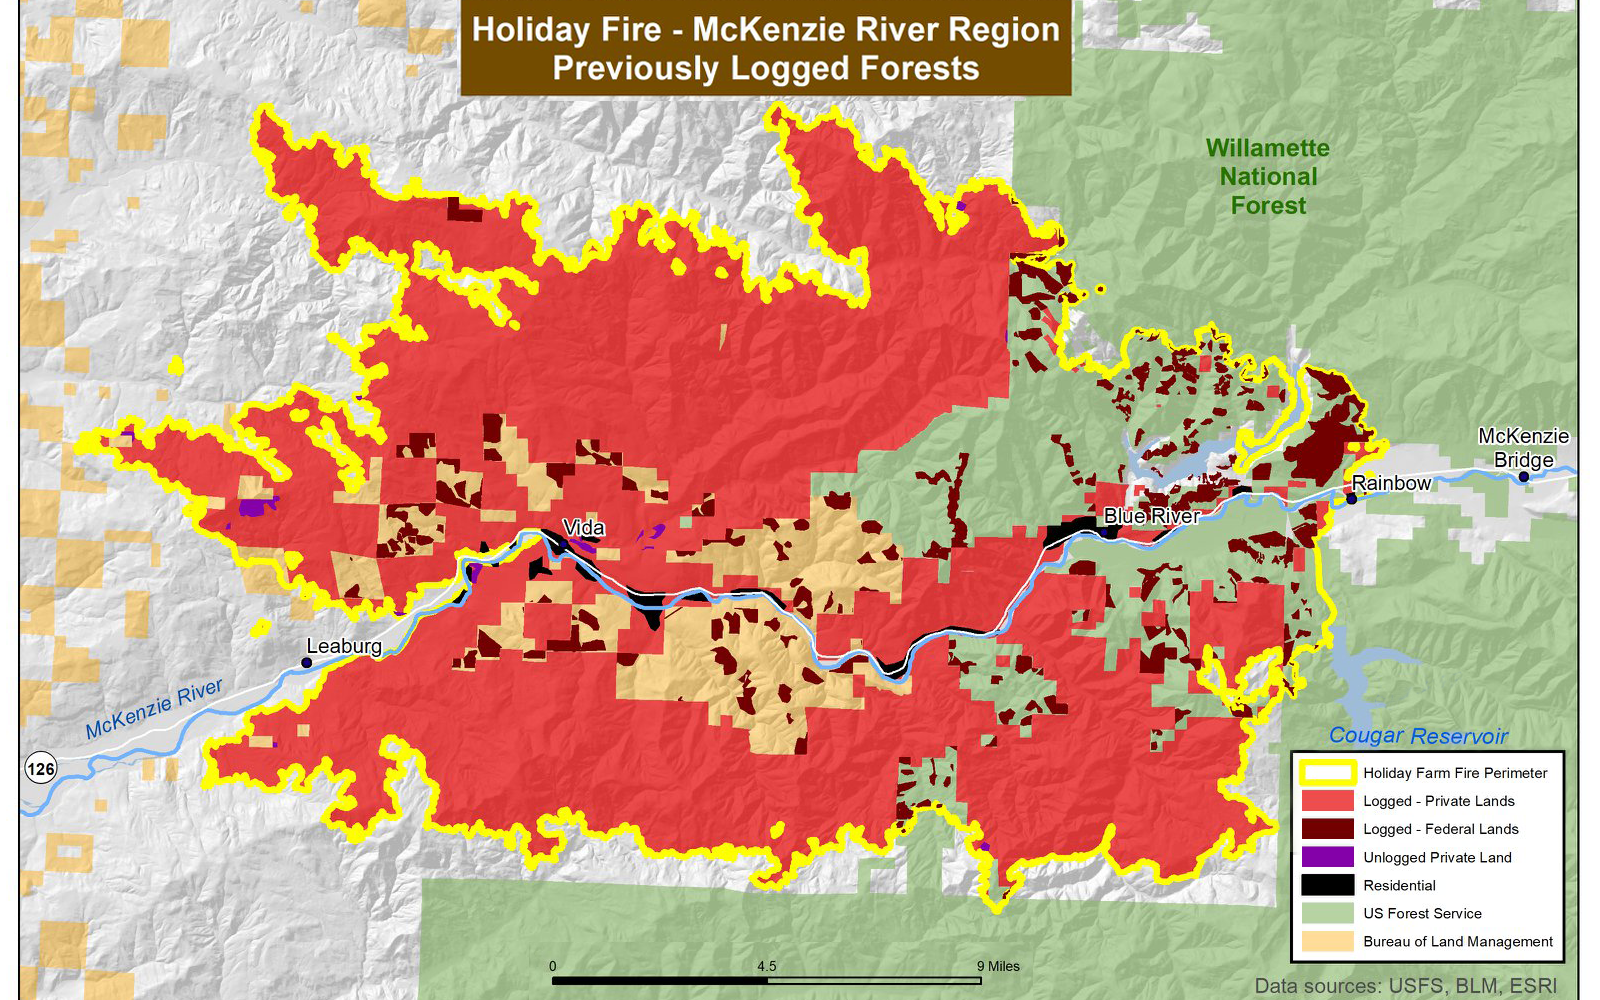 BLM approves 910-acre salvage harvest in Holiday Farm Fire area